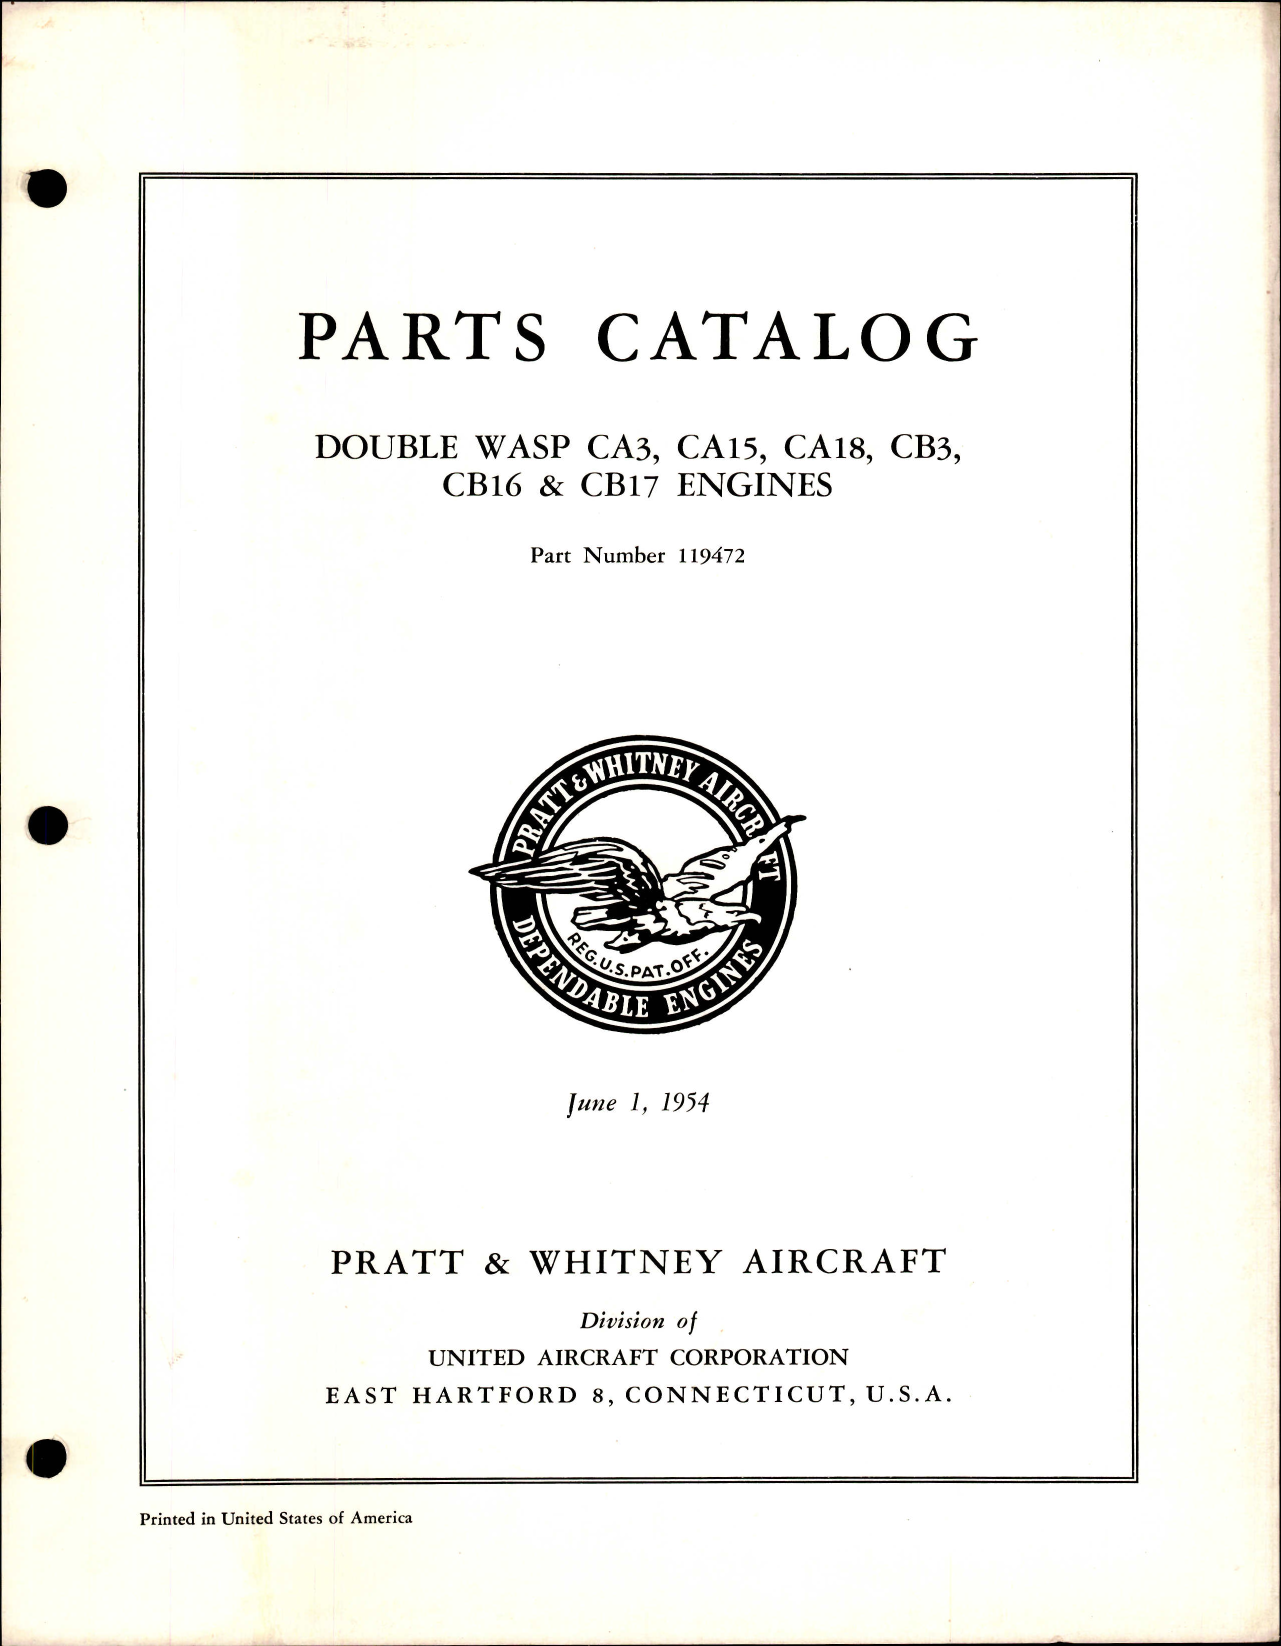 Sample page 1 from AirCorps Library document: Parts Catalog for Double Wasp CA3, CA15, CA18, CB3, CB16 & CB17 Engines